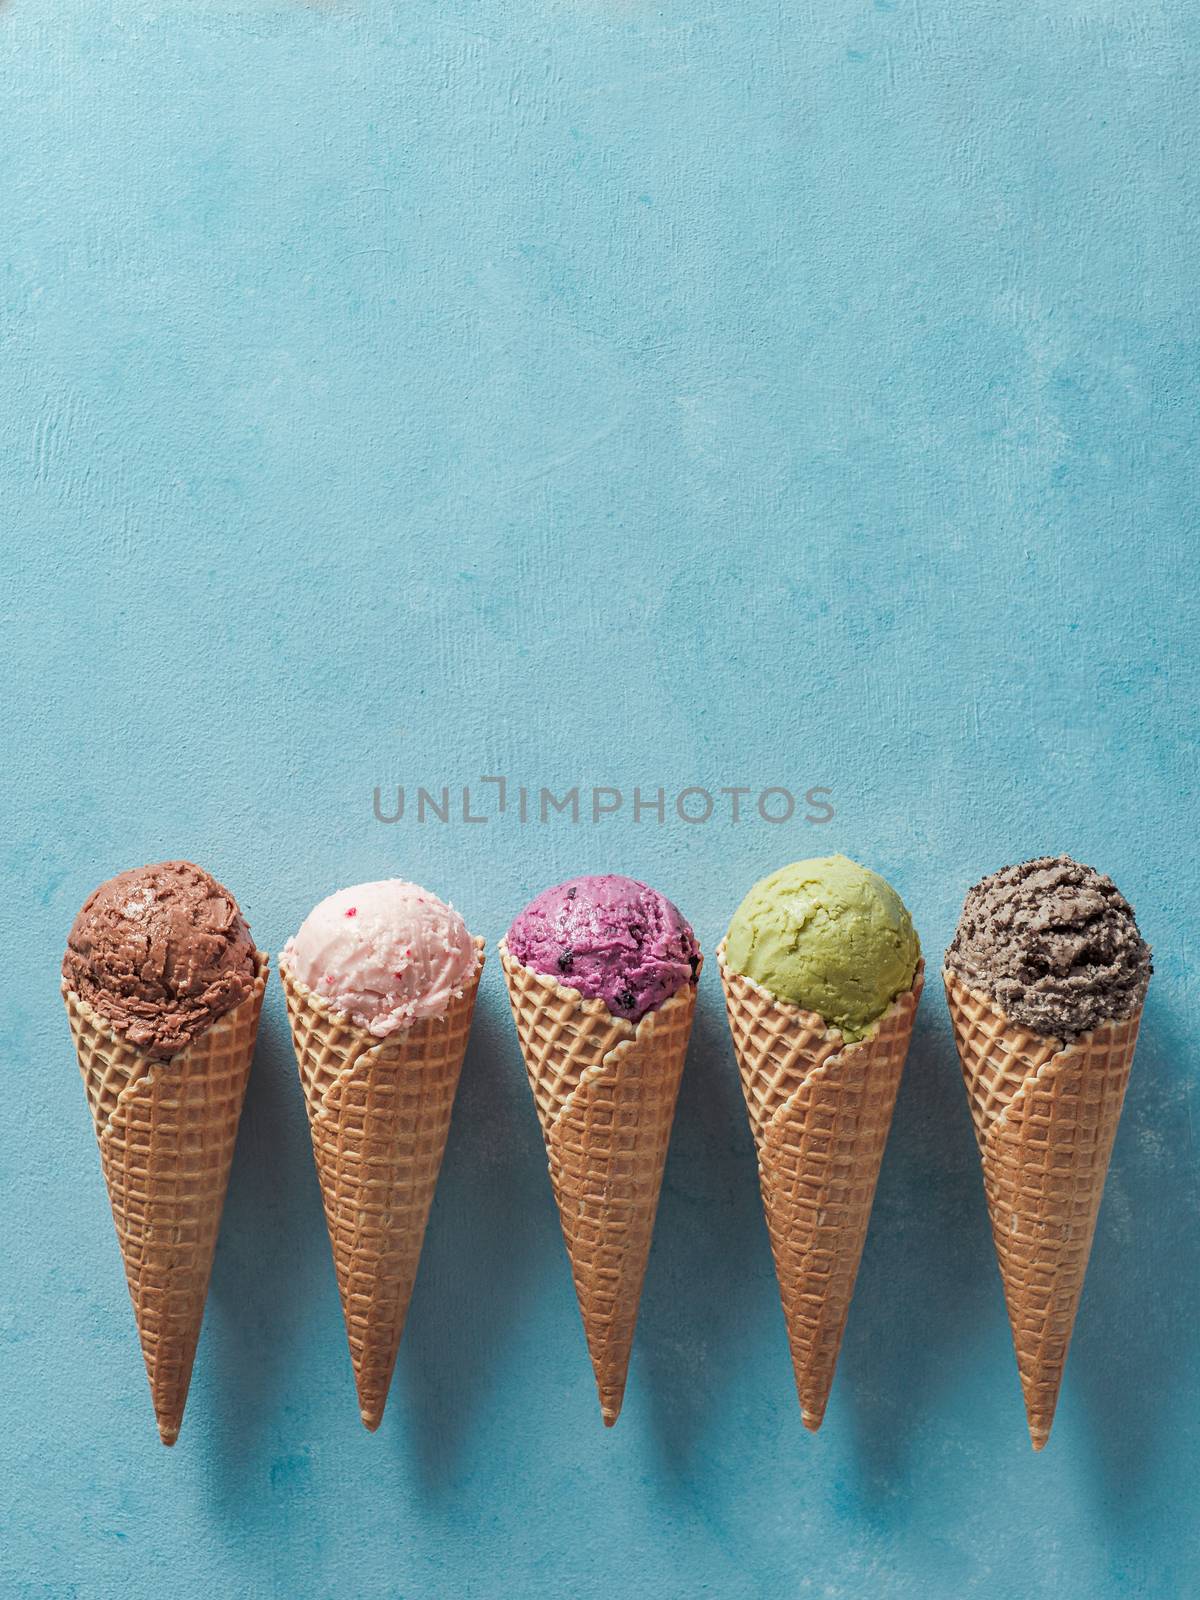 Various ice cream scoops in cones with copy space. Colorful ice cream in cones chocolate, strawberry, blueberry, pistachio or matcha, biscuits chocolate sandwich cookies on blue background. Top view